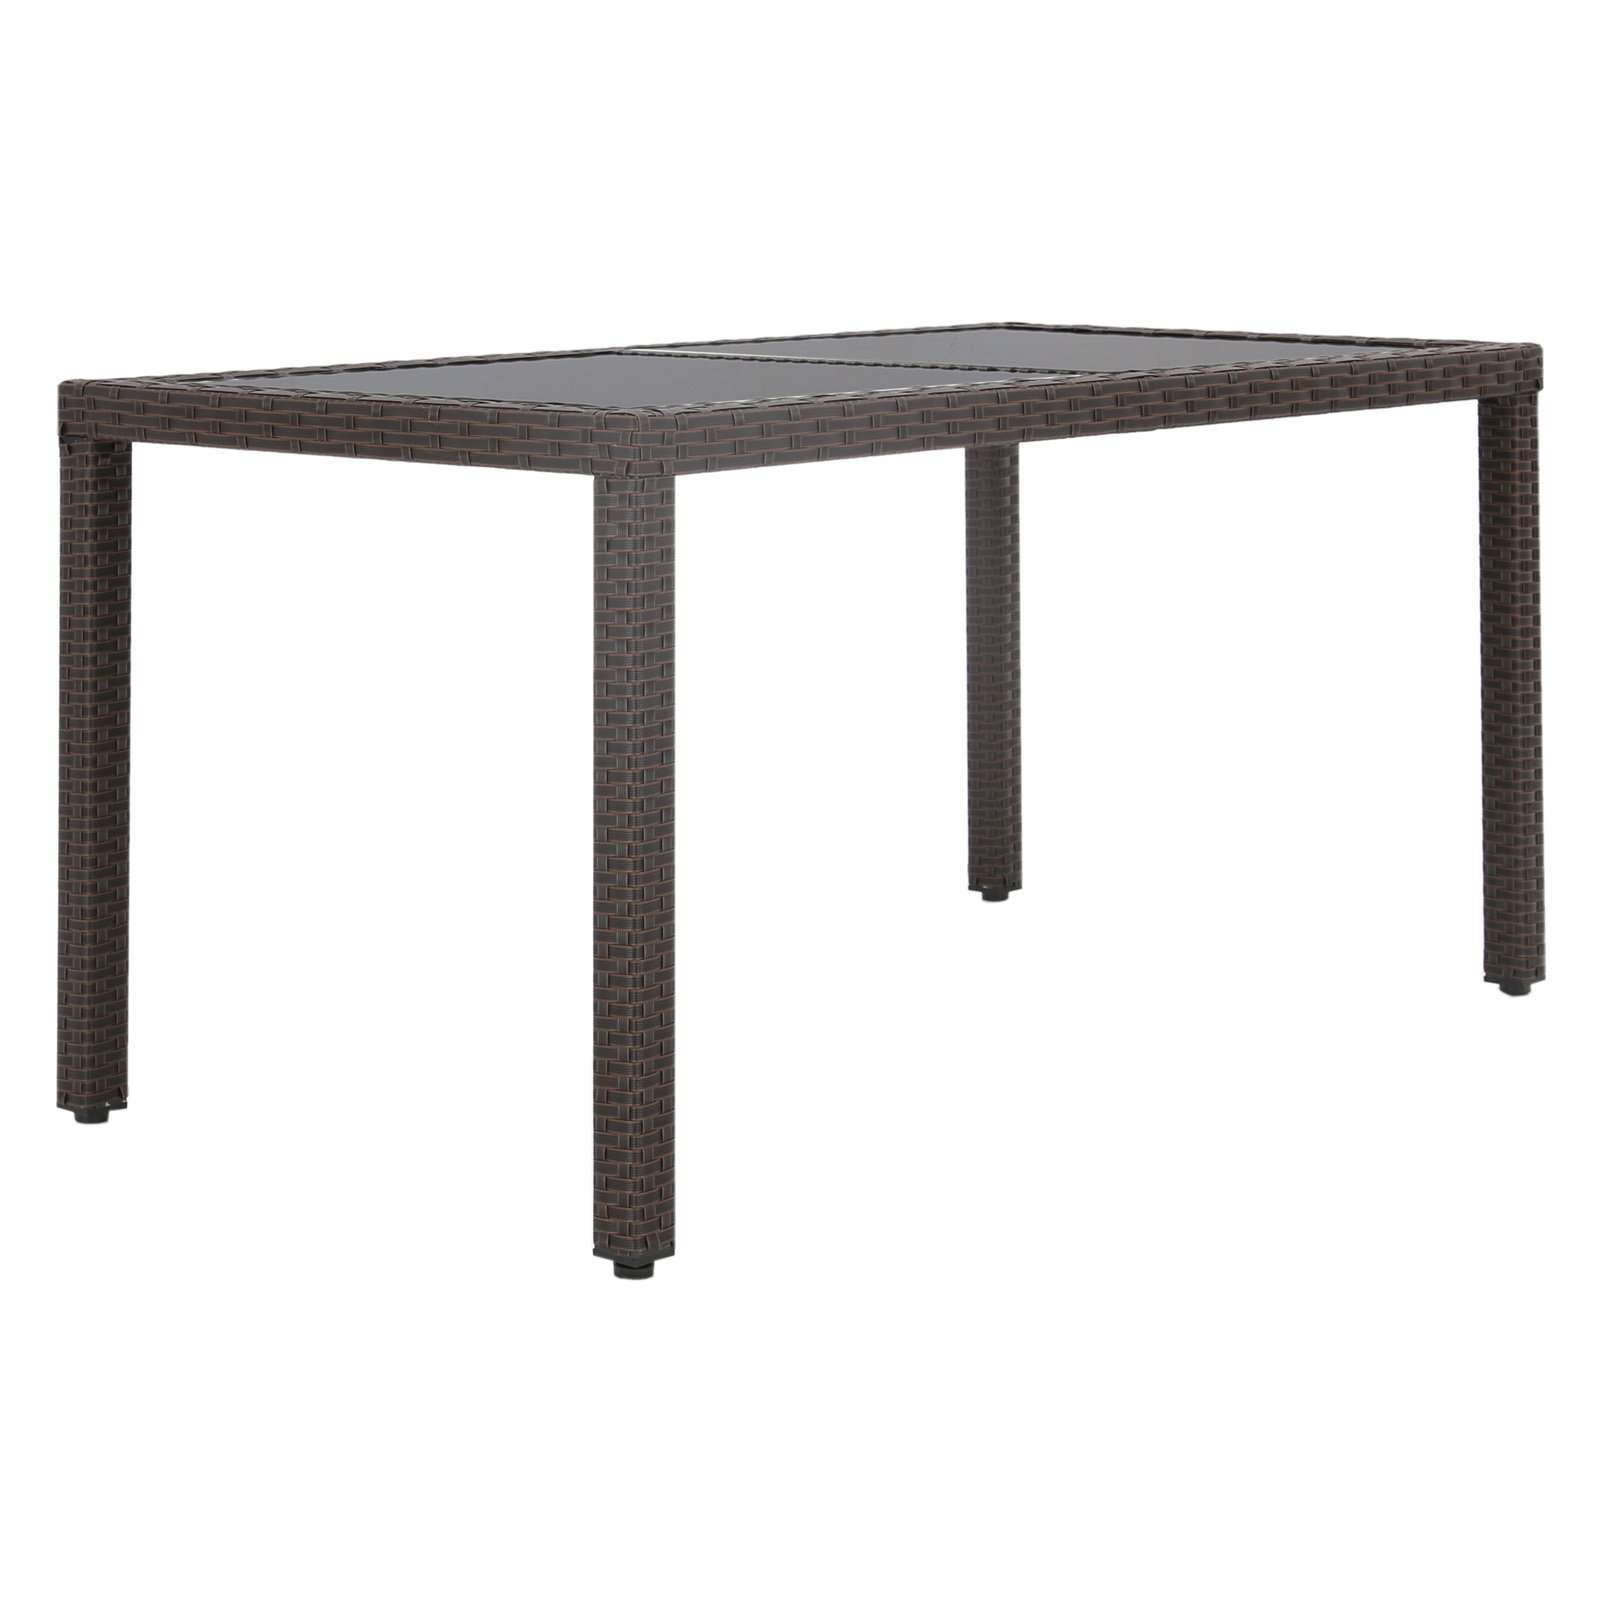 Baner Garden  Outdoor Patio Resin Wicker Steel Rectangle Dining Table Furniture, Chocolate - 57.1 x 30.3 x 28.5 in. - image 1 of 5